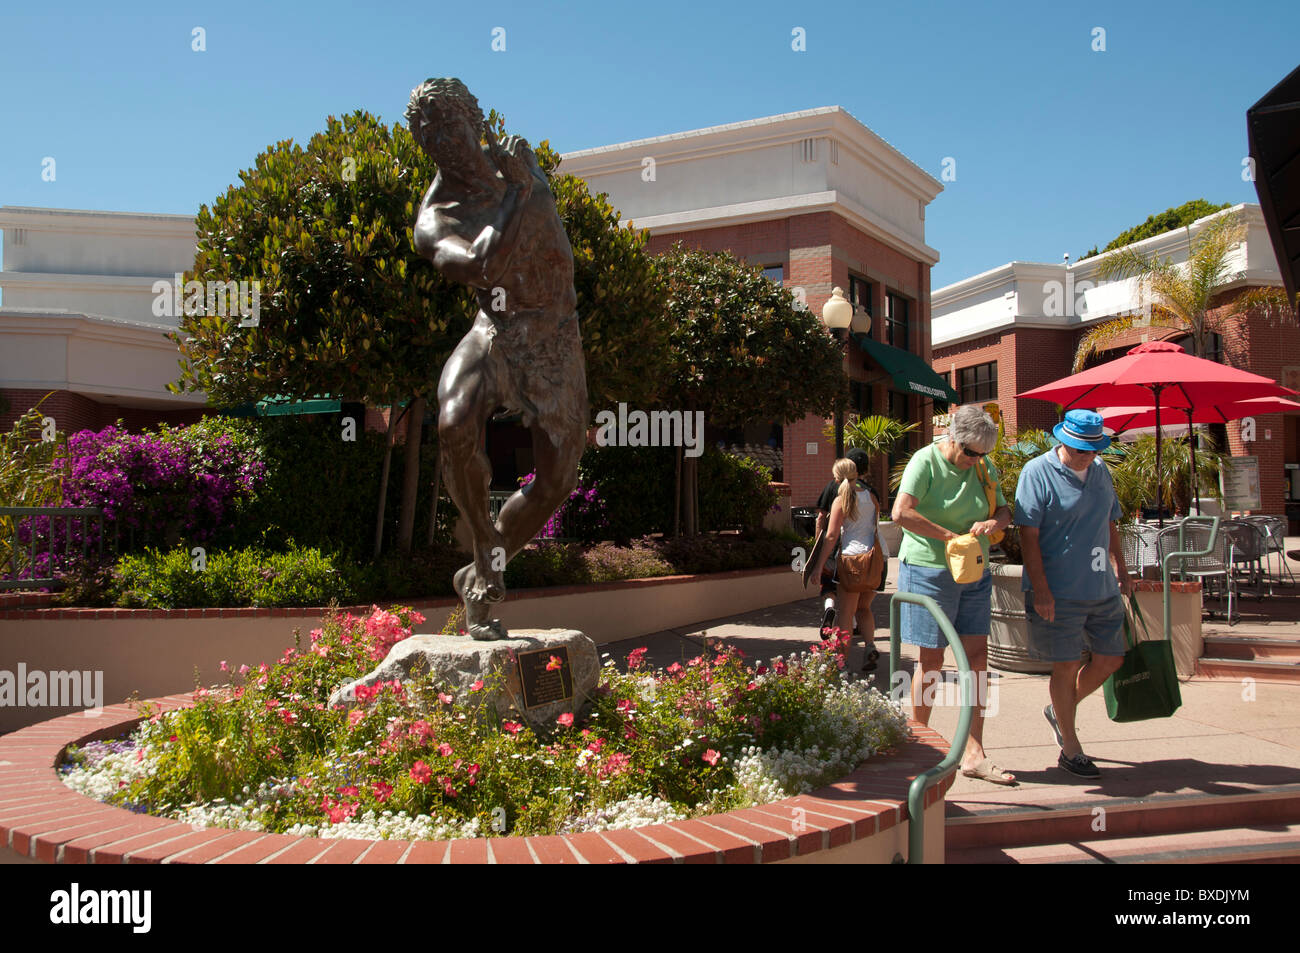 San Luis Obispo downtown outdoor mall and sculpture. Stock Photo